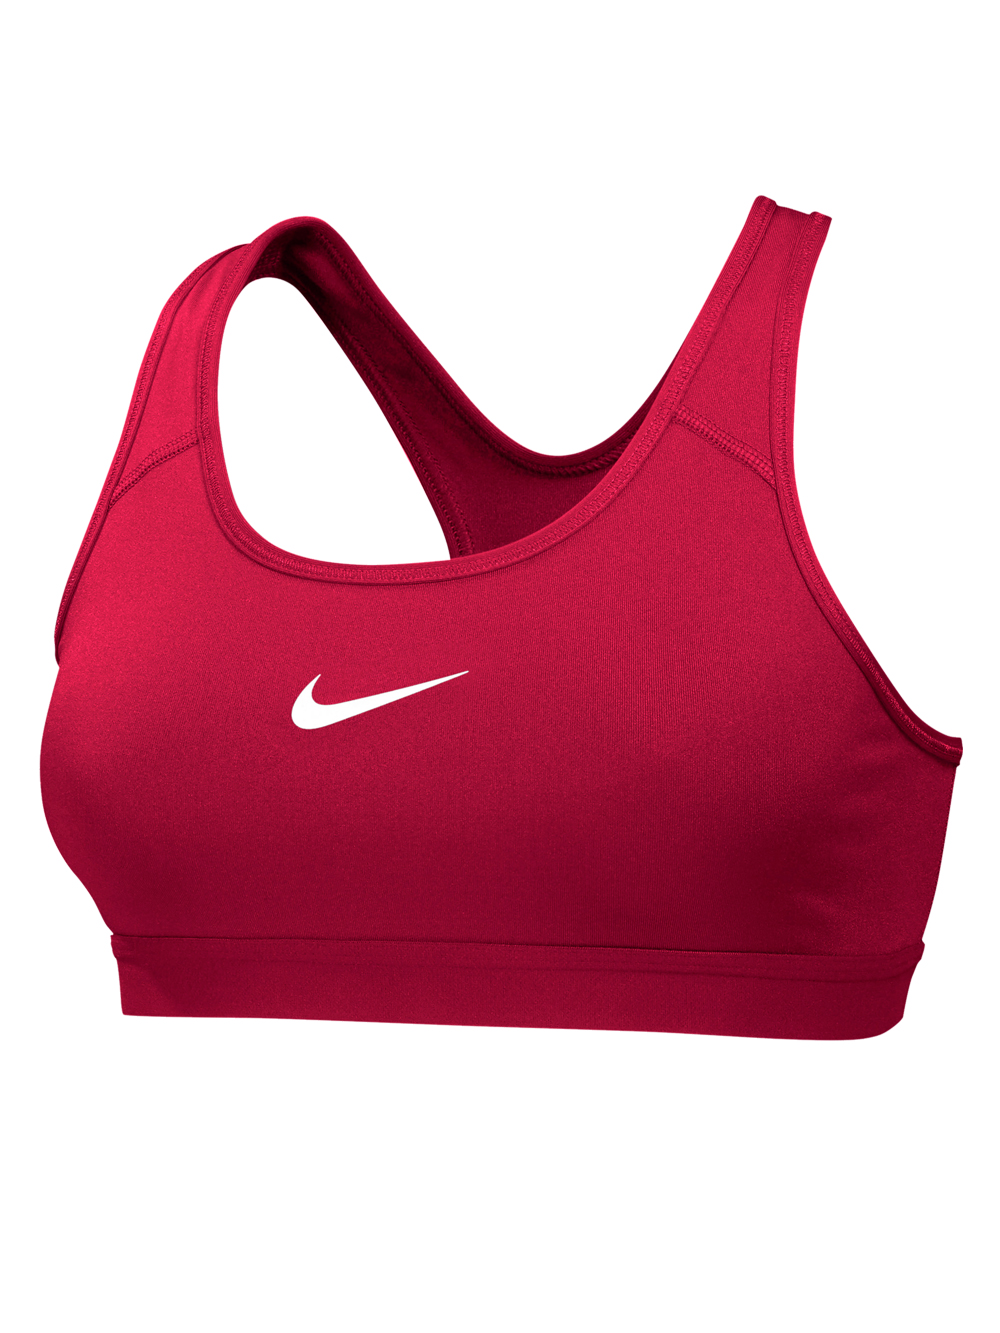 Nike Pro Classic Sports Bra | Midwest Volleyball Warehouse